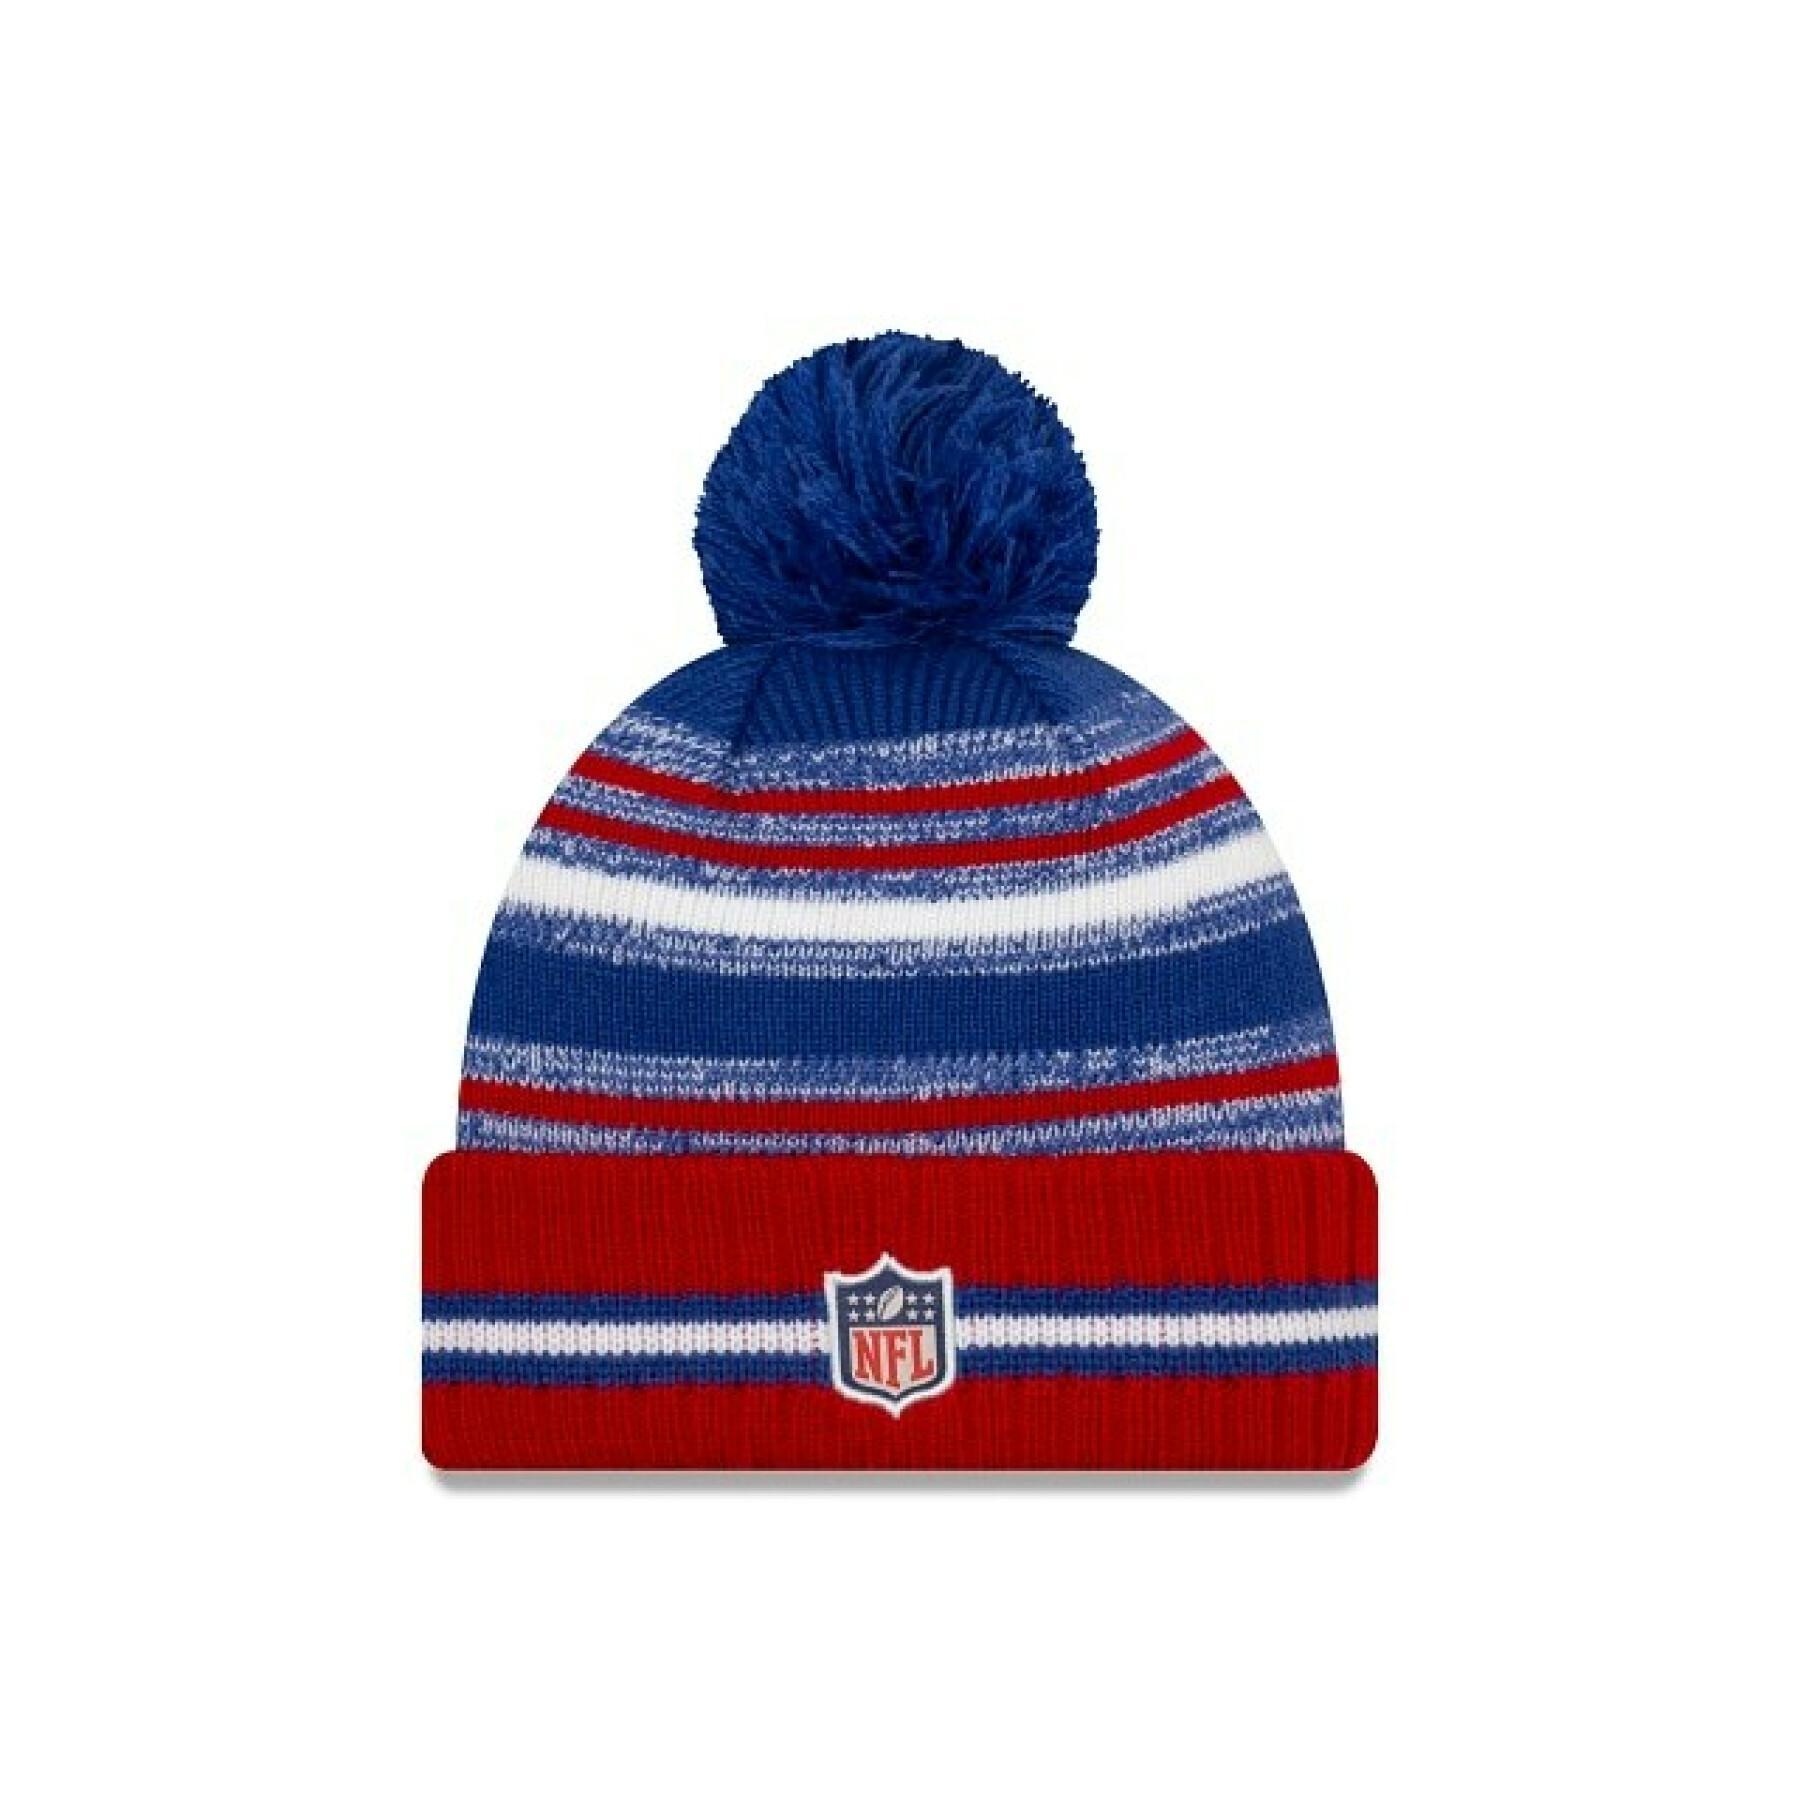 Bonnet with pompon New York Giants 2021/22